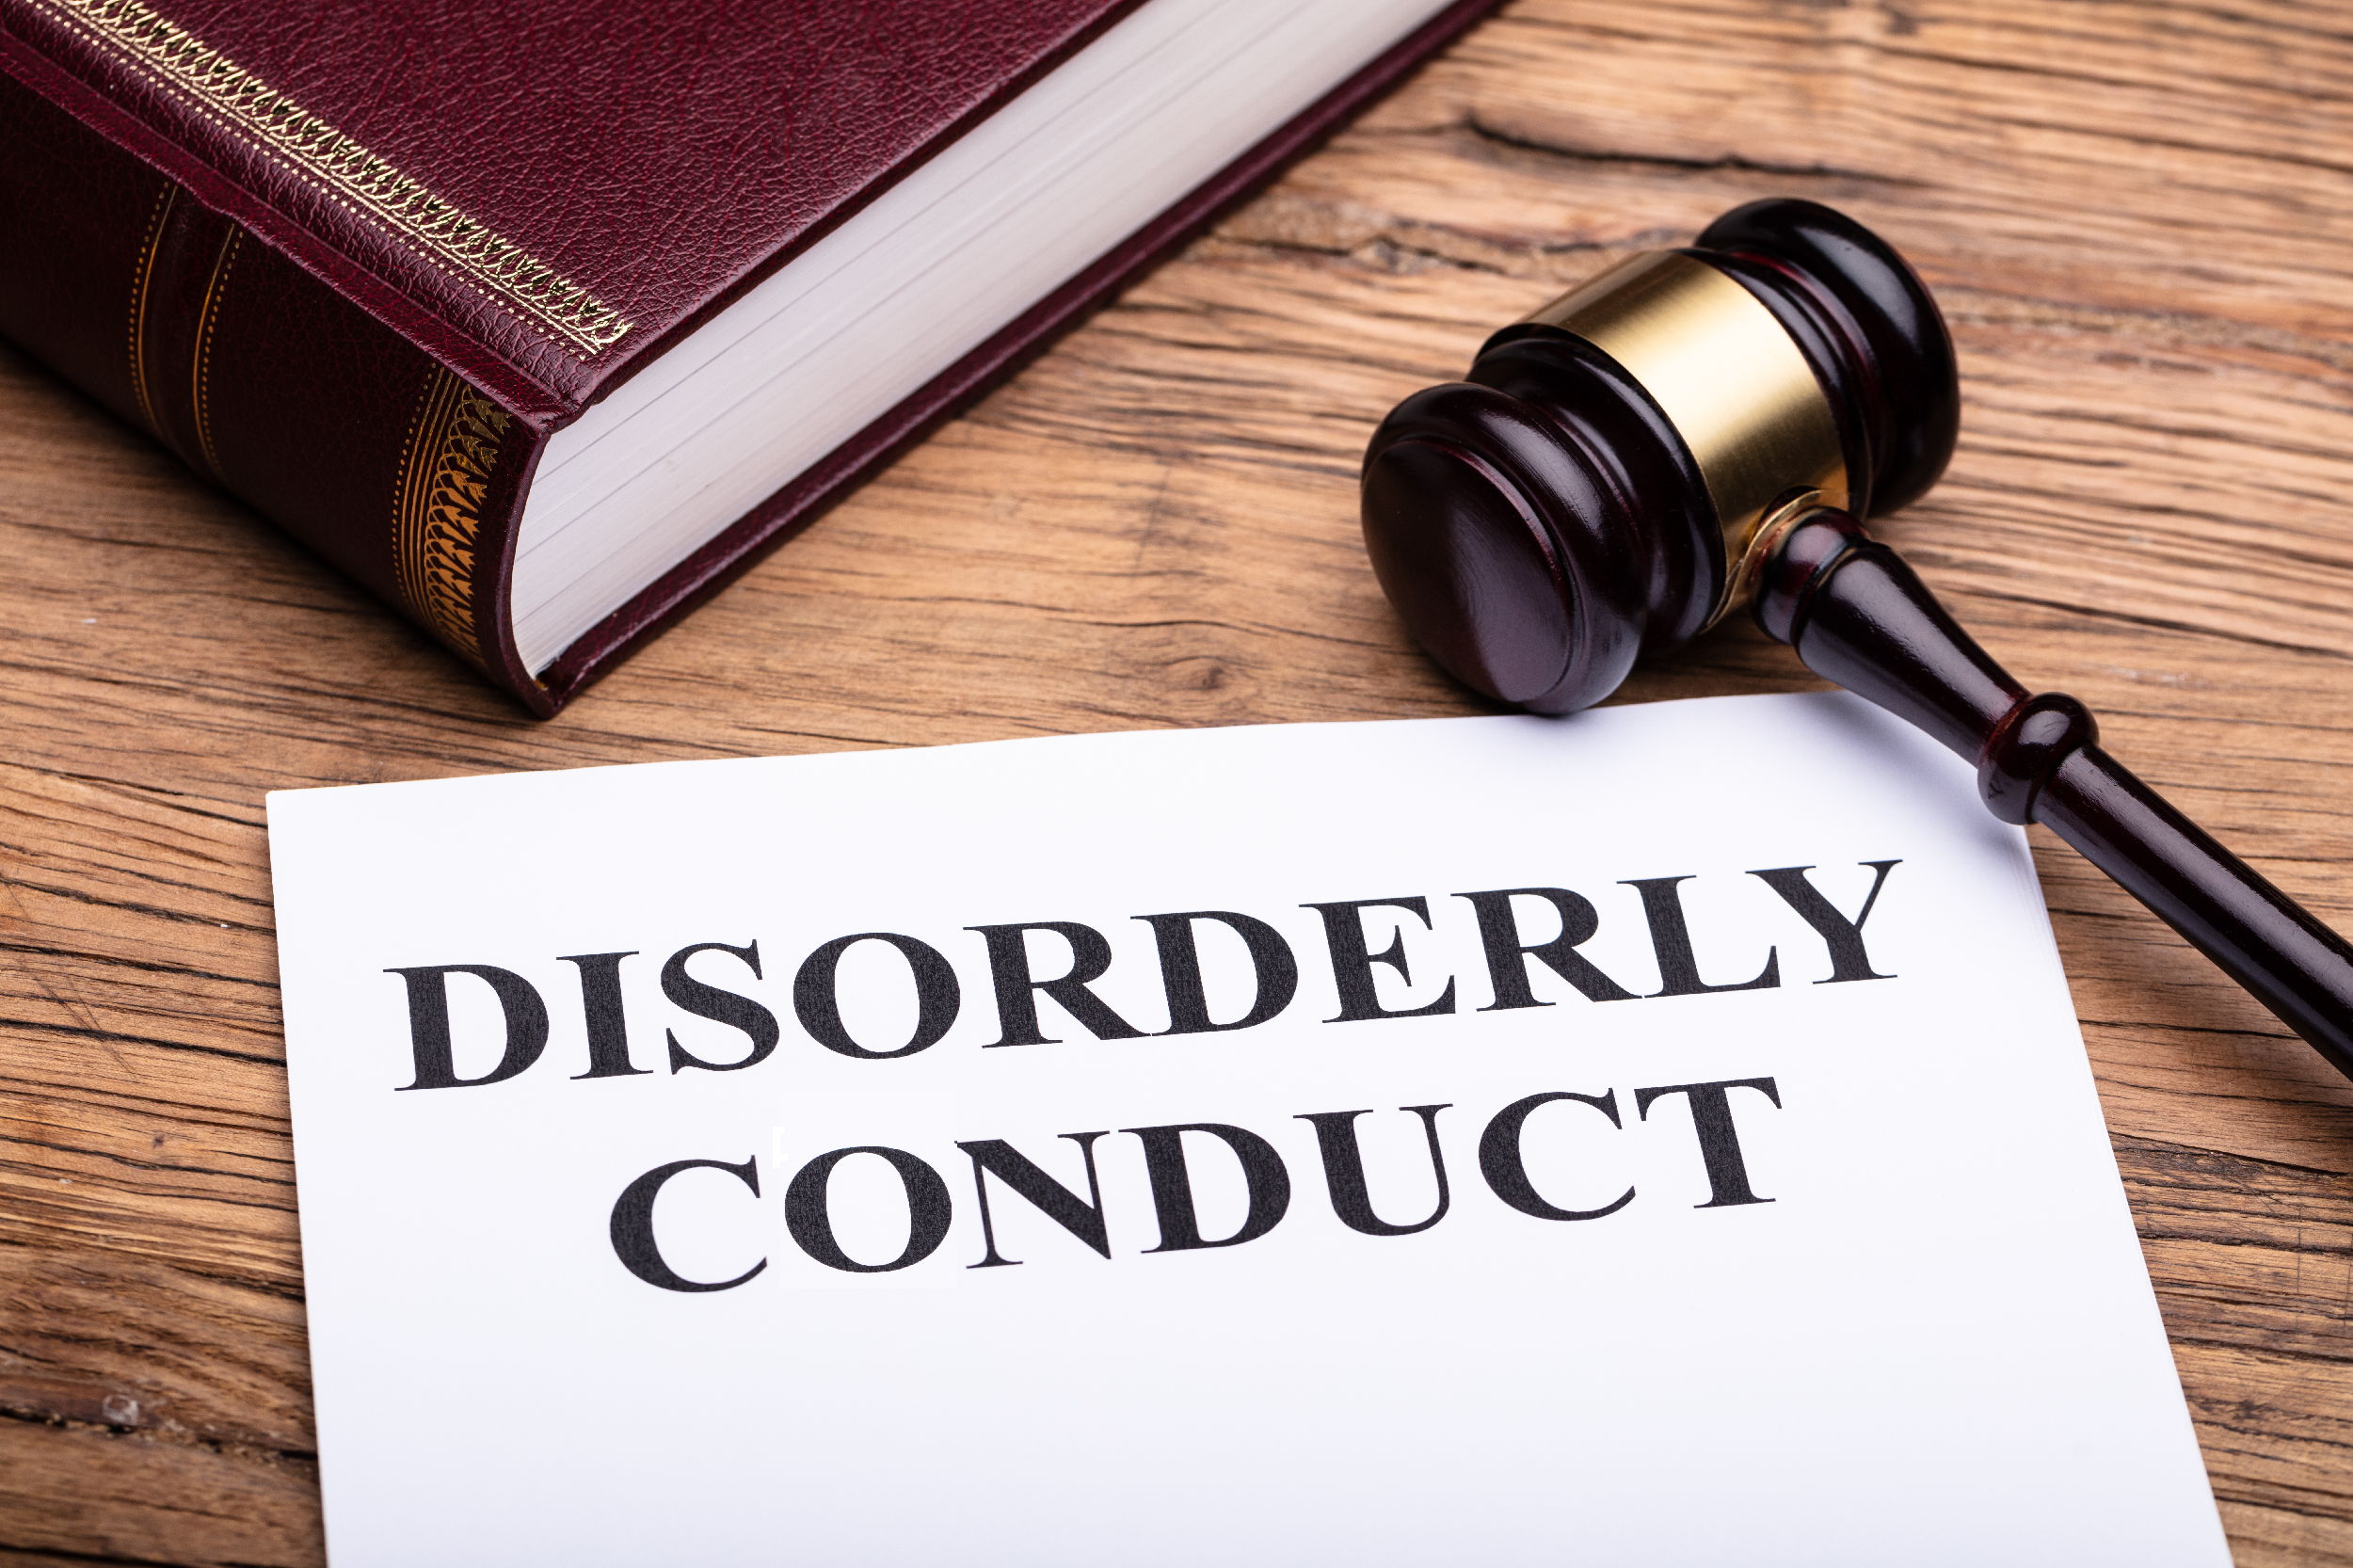 Is Disorderly Conduct a Felony in Minneapolis, Minnesota